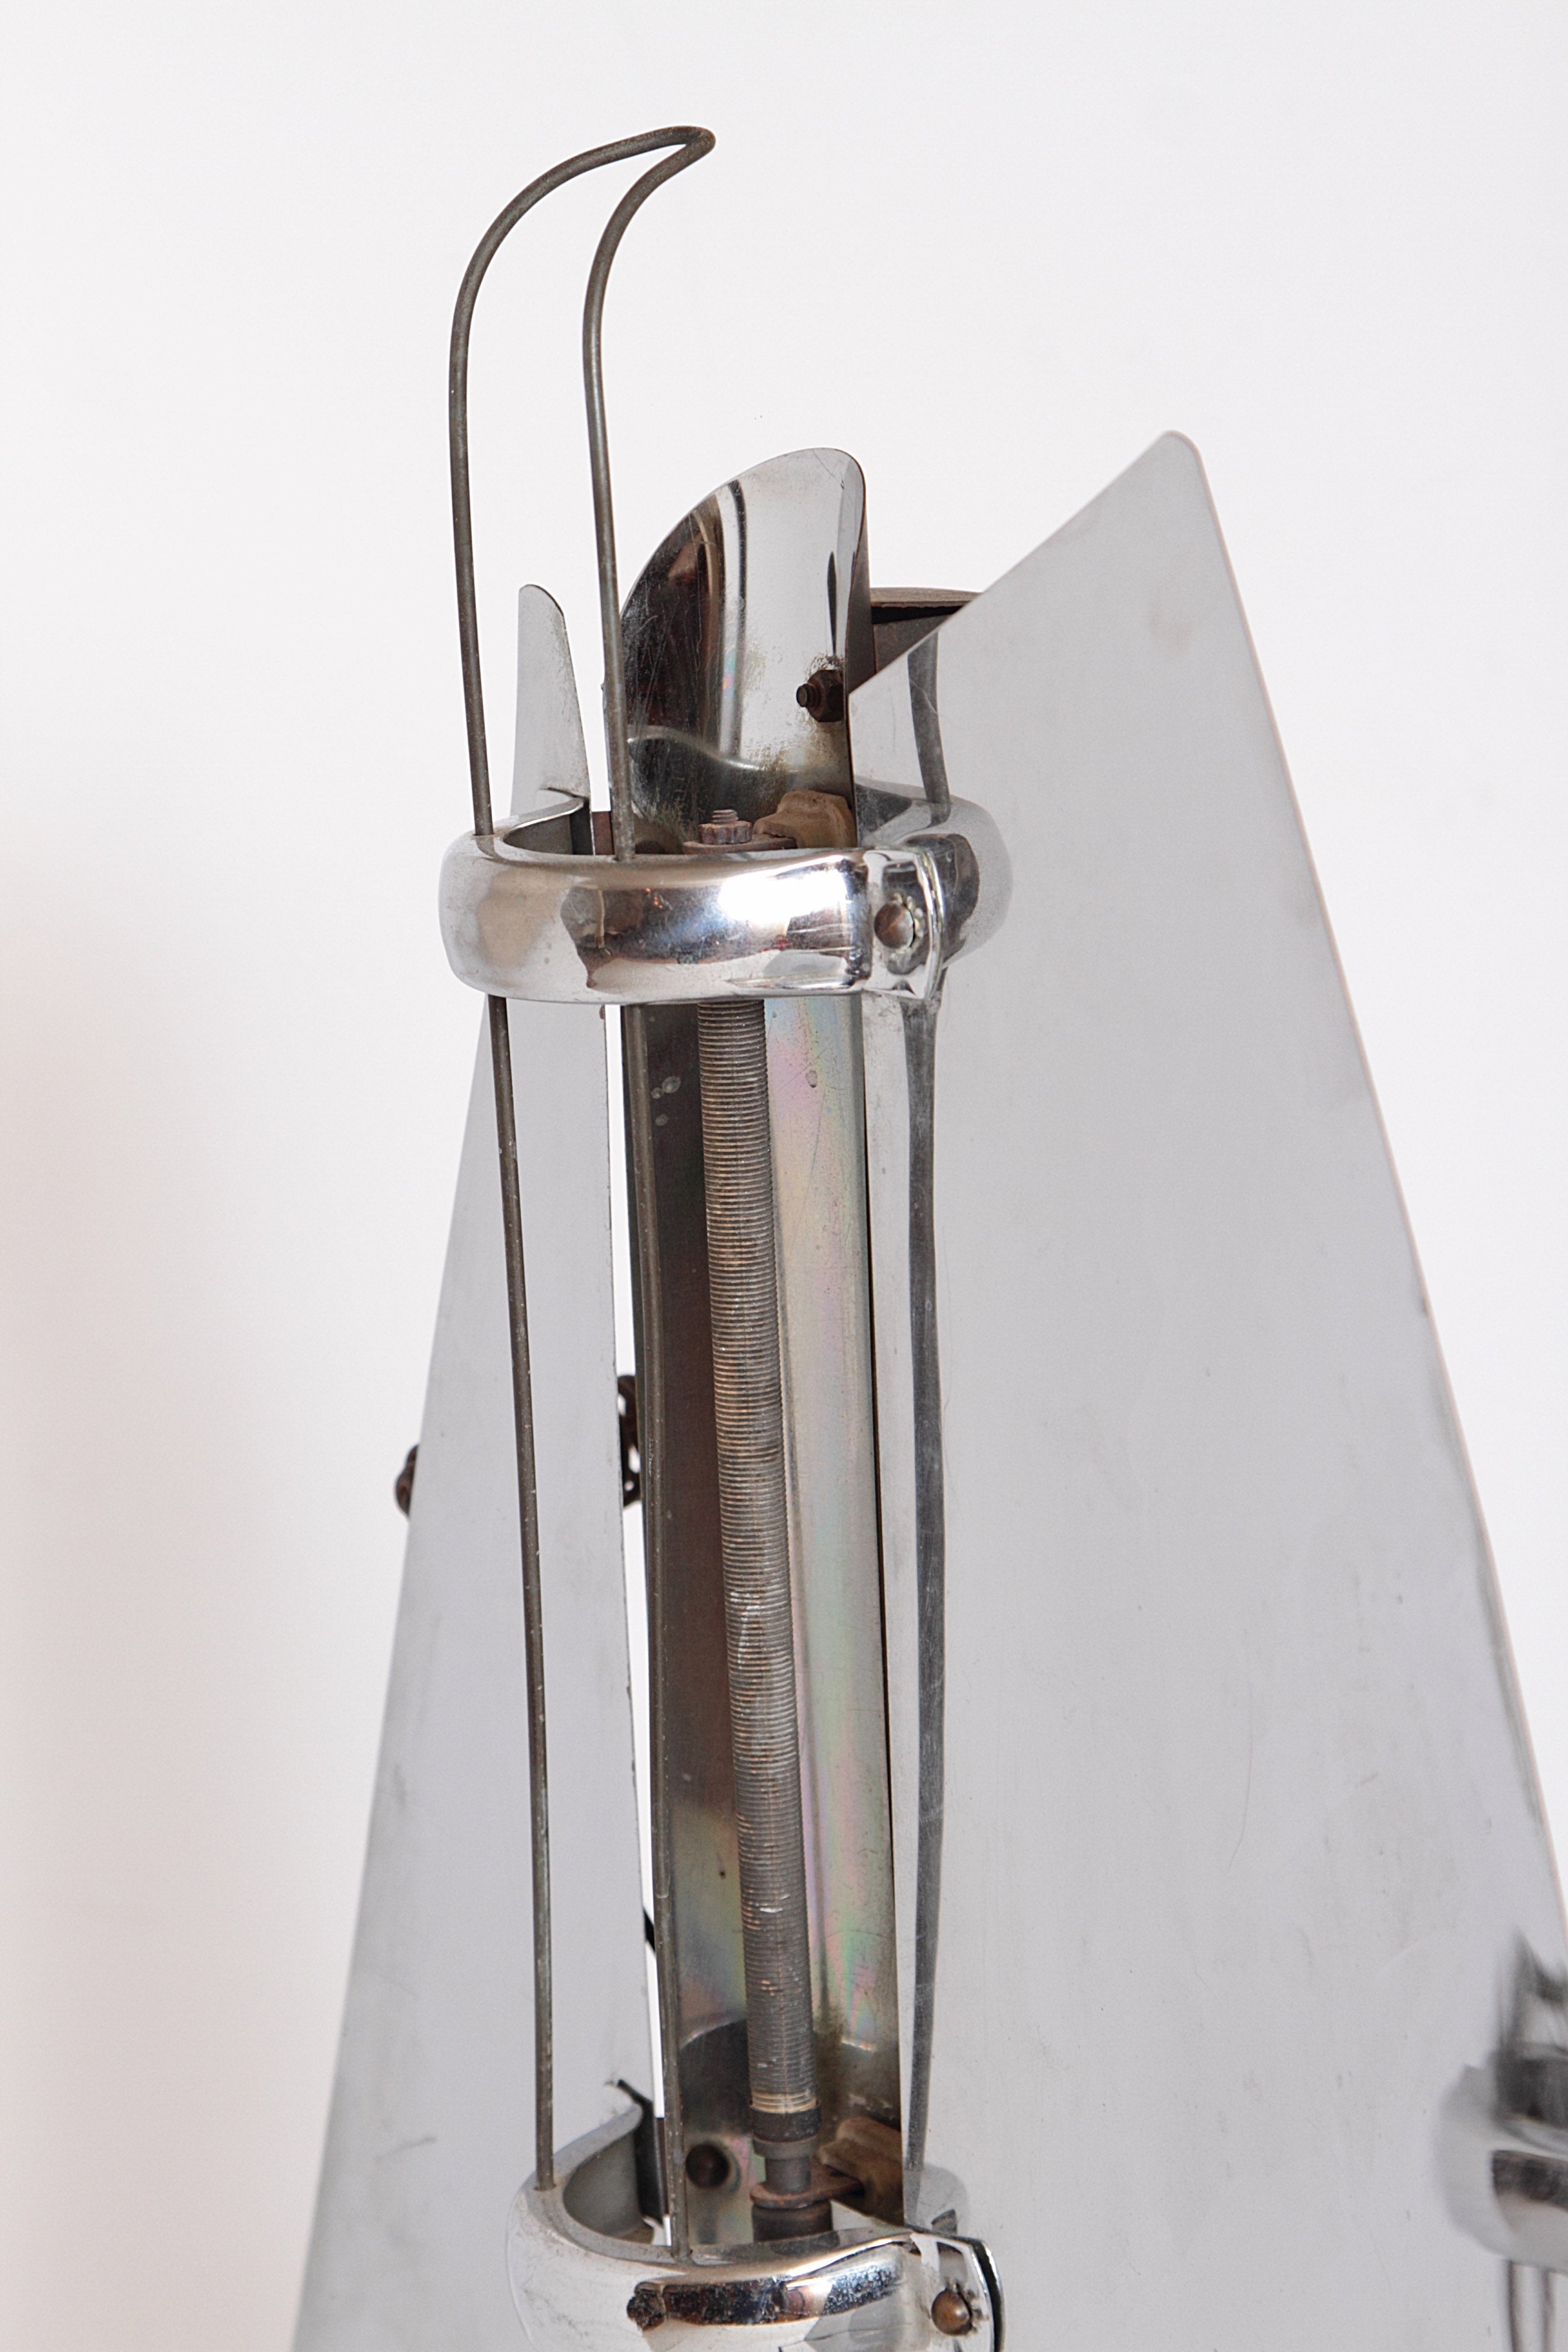 Art Deco British Machine Age Sailboat Radiant Heater by Bunting Electric, circa 1930s For Sale